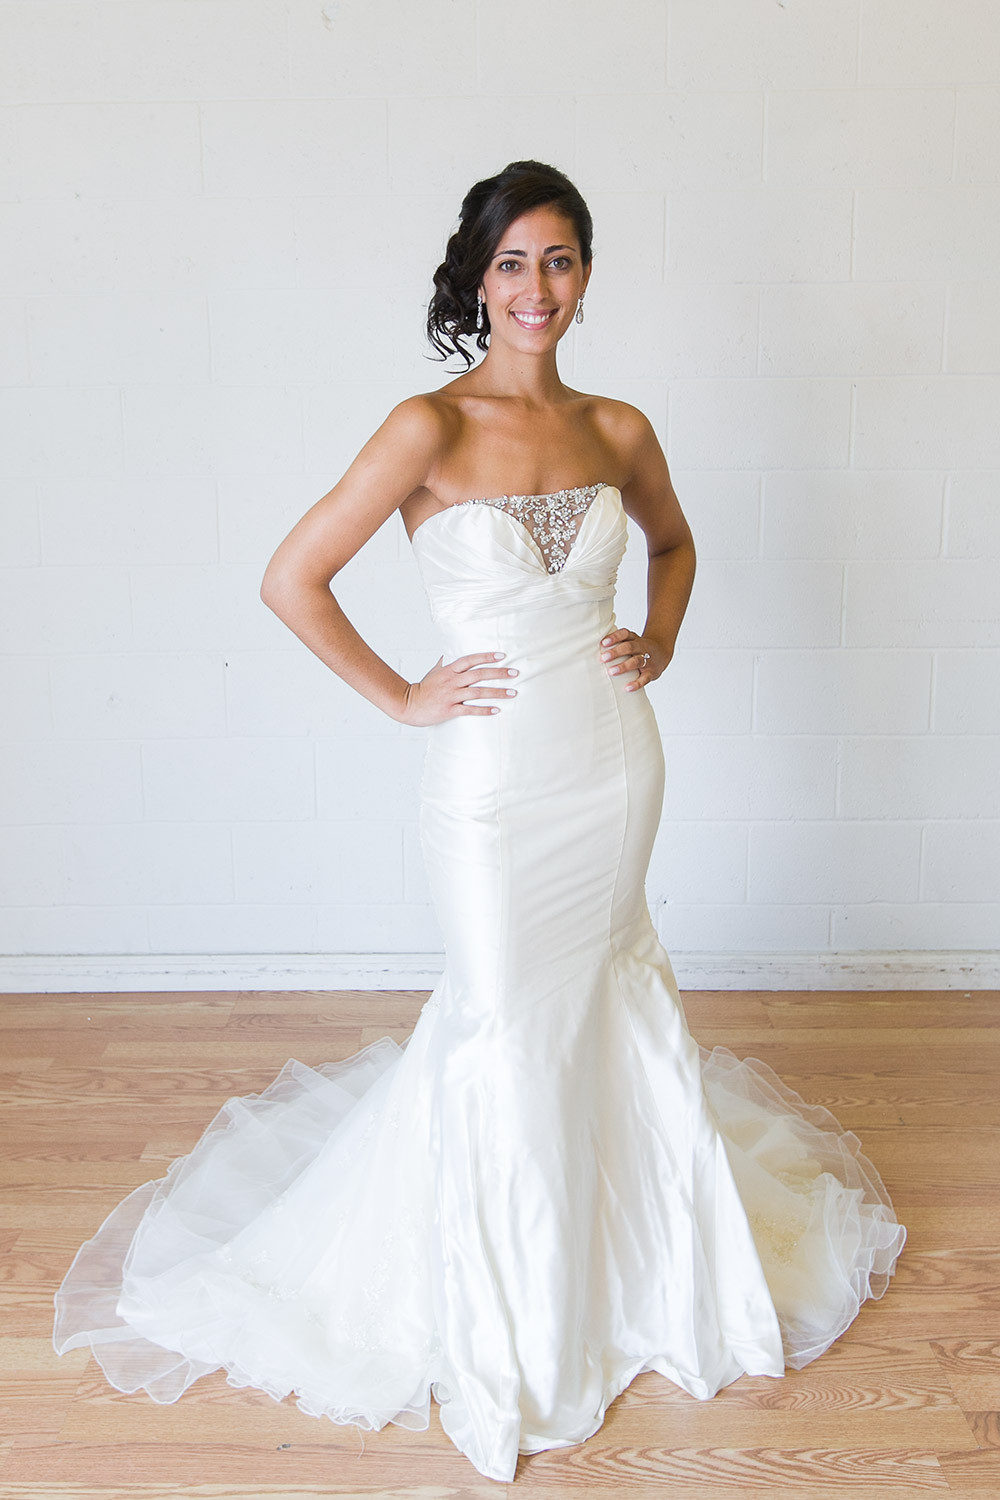 Rent Wedding Dress
 The Pros and Cons of a Wedding Dress Rental